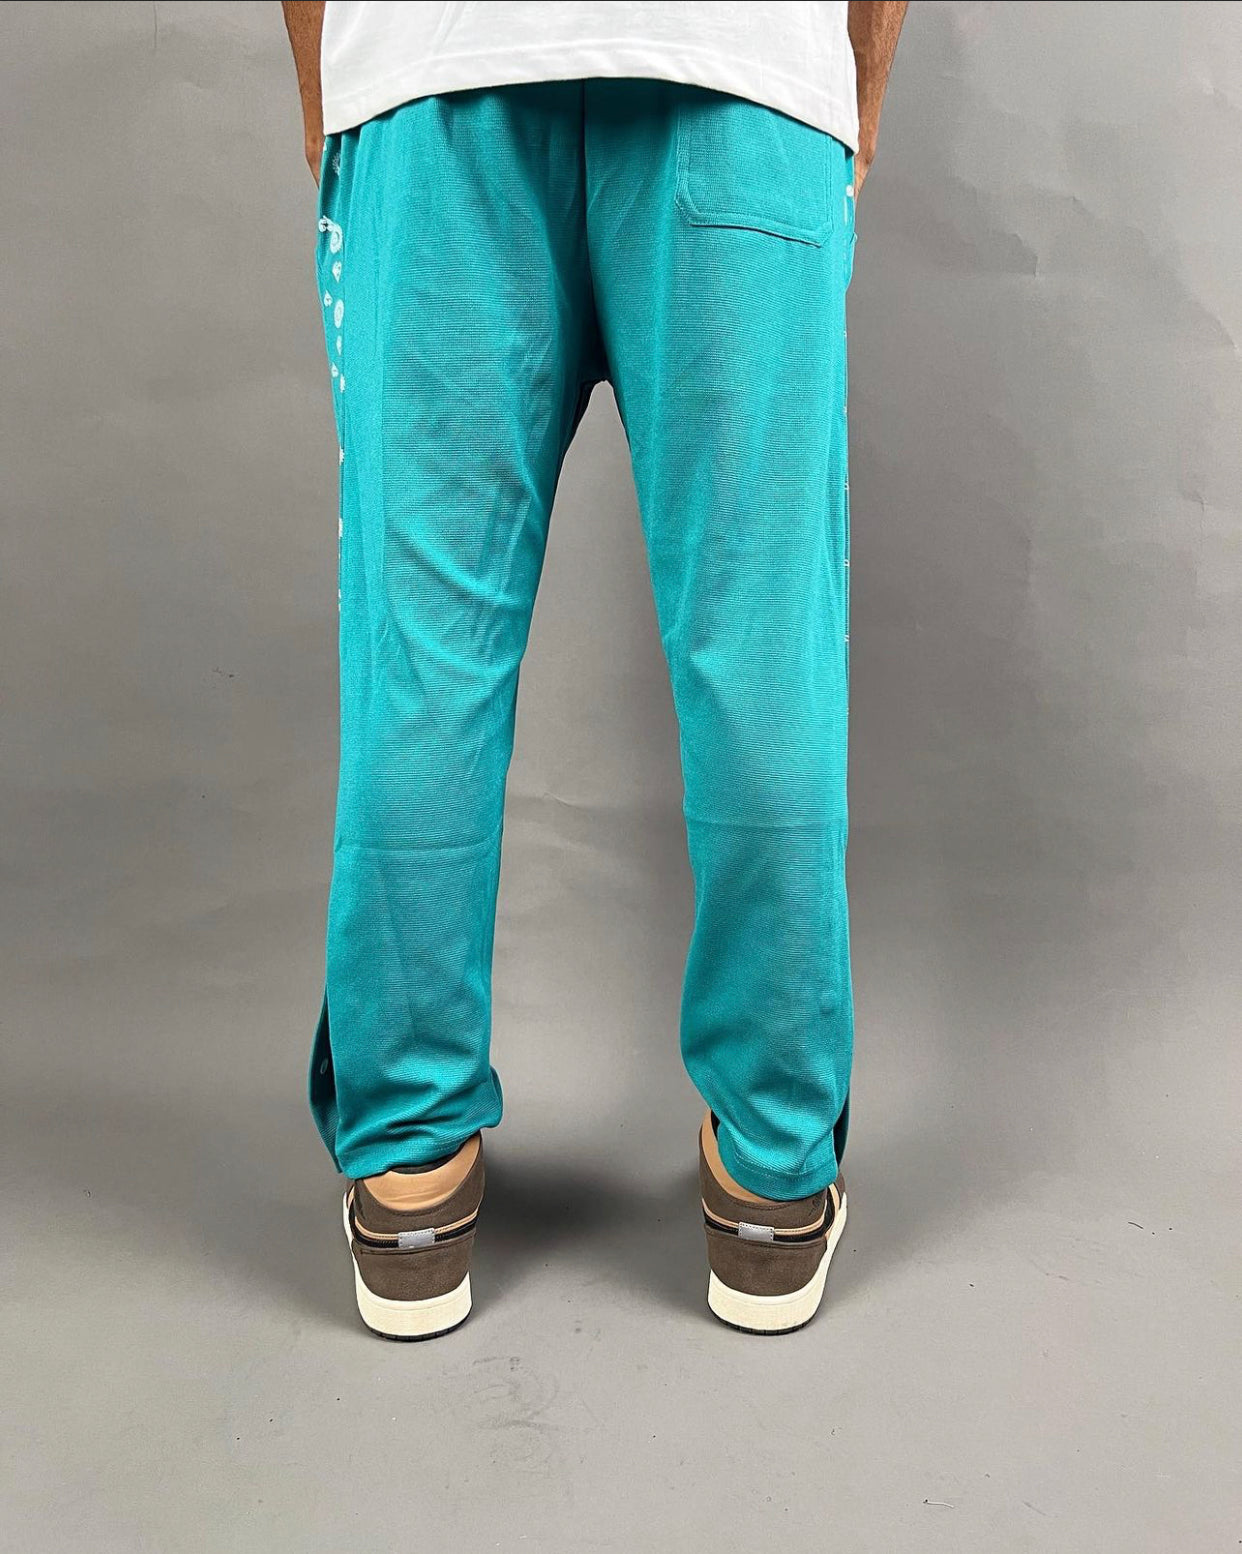 Sport track pant in green colour